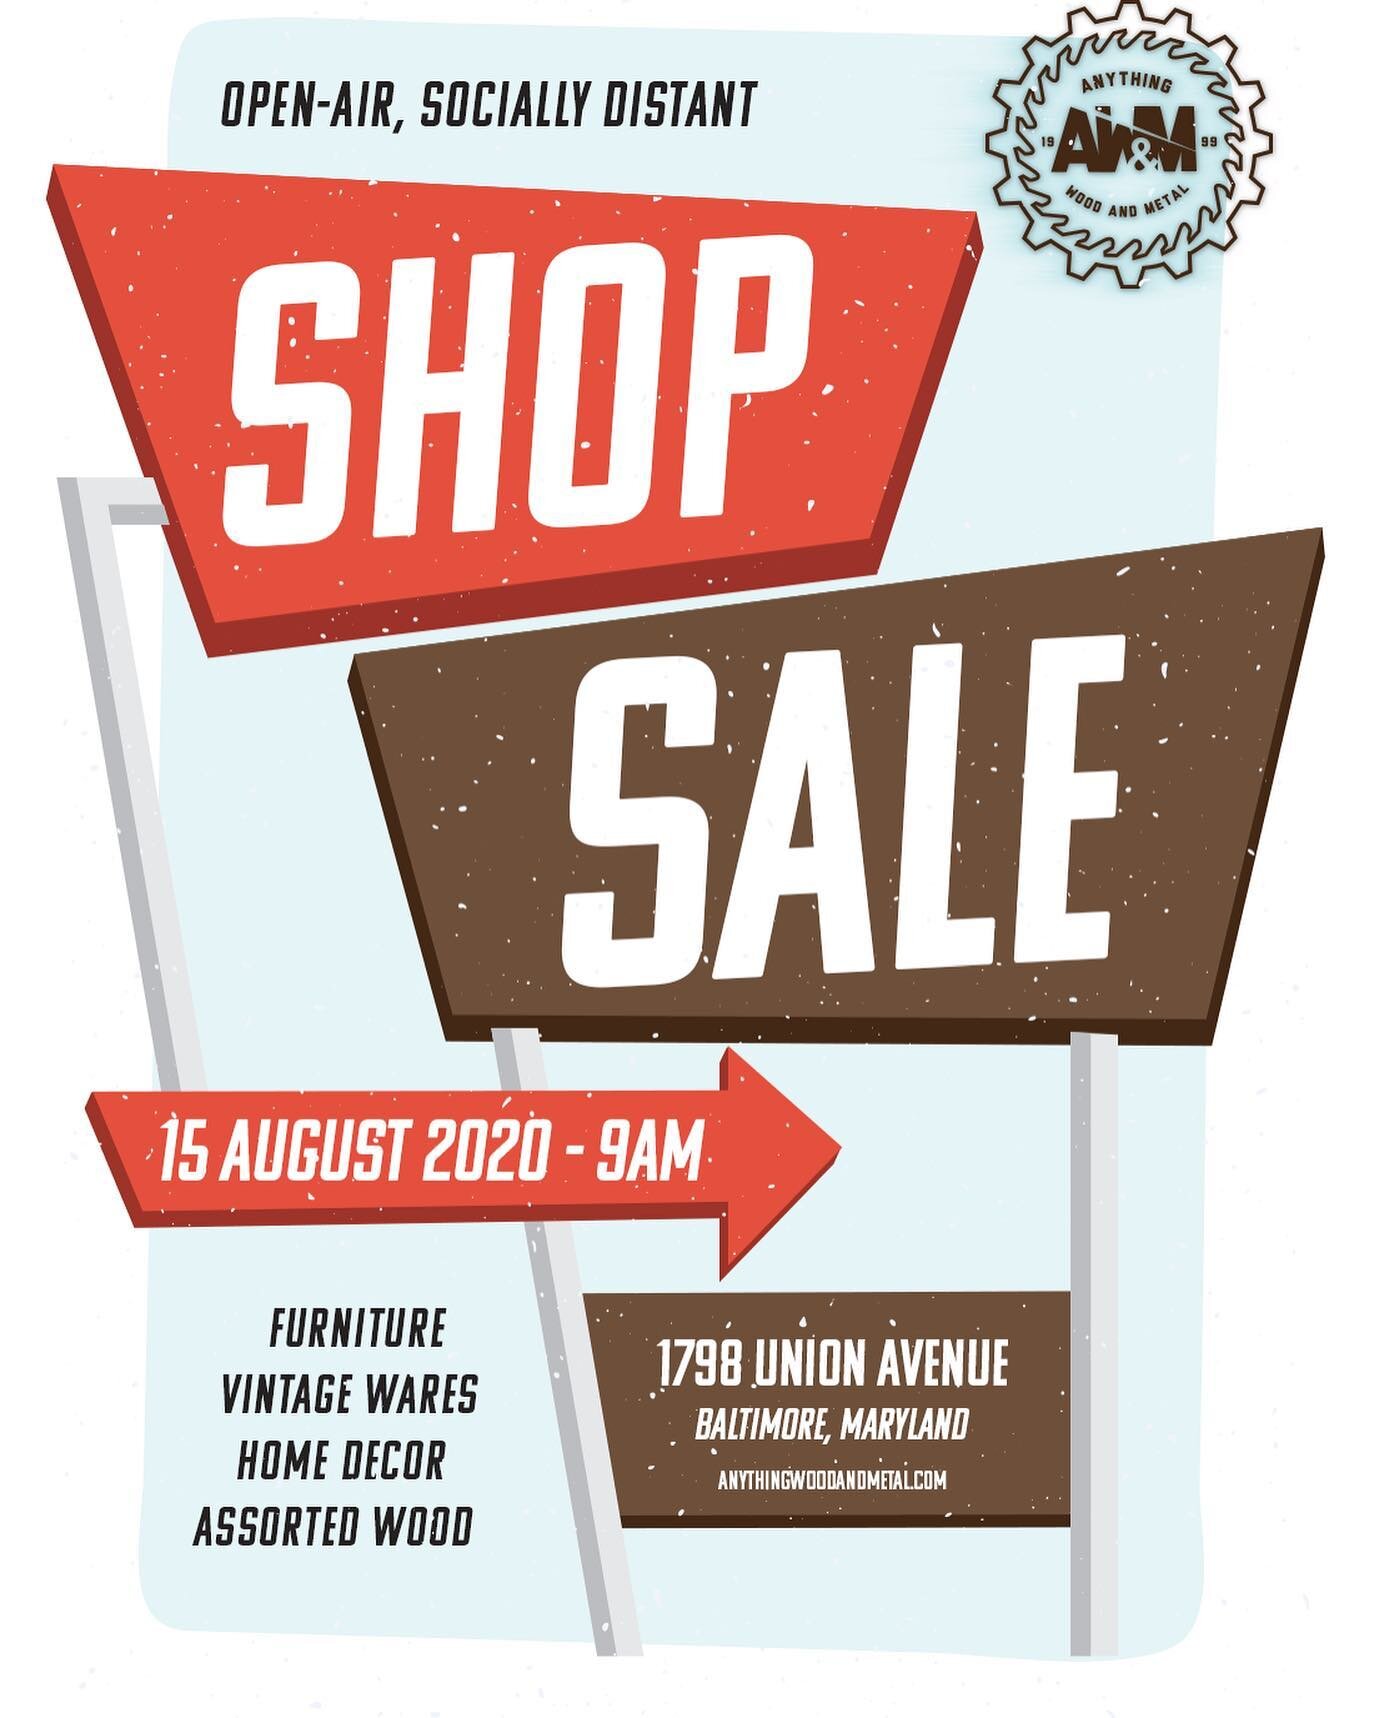 Calling all thrifters!! Stop by AWM on 8/15 starting at 9am for our first Shop Sale! Vintage items, home decor, and more. Check out our story highlights for a sneak peek 👀 EVERYTHING MUST GO 🕺🏼